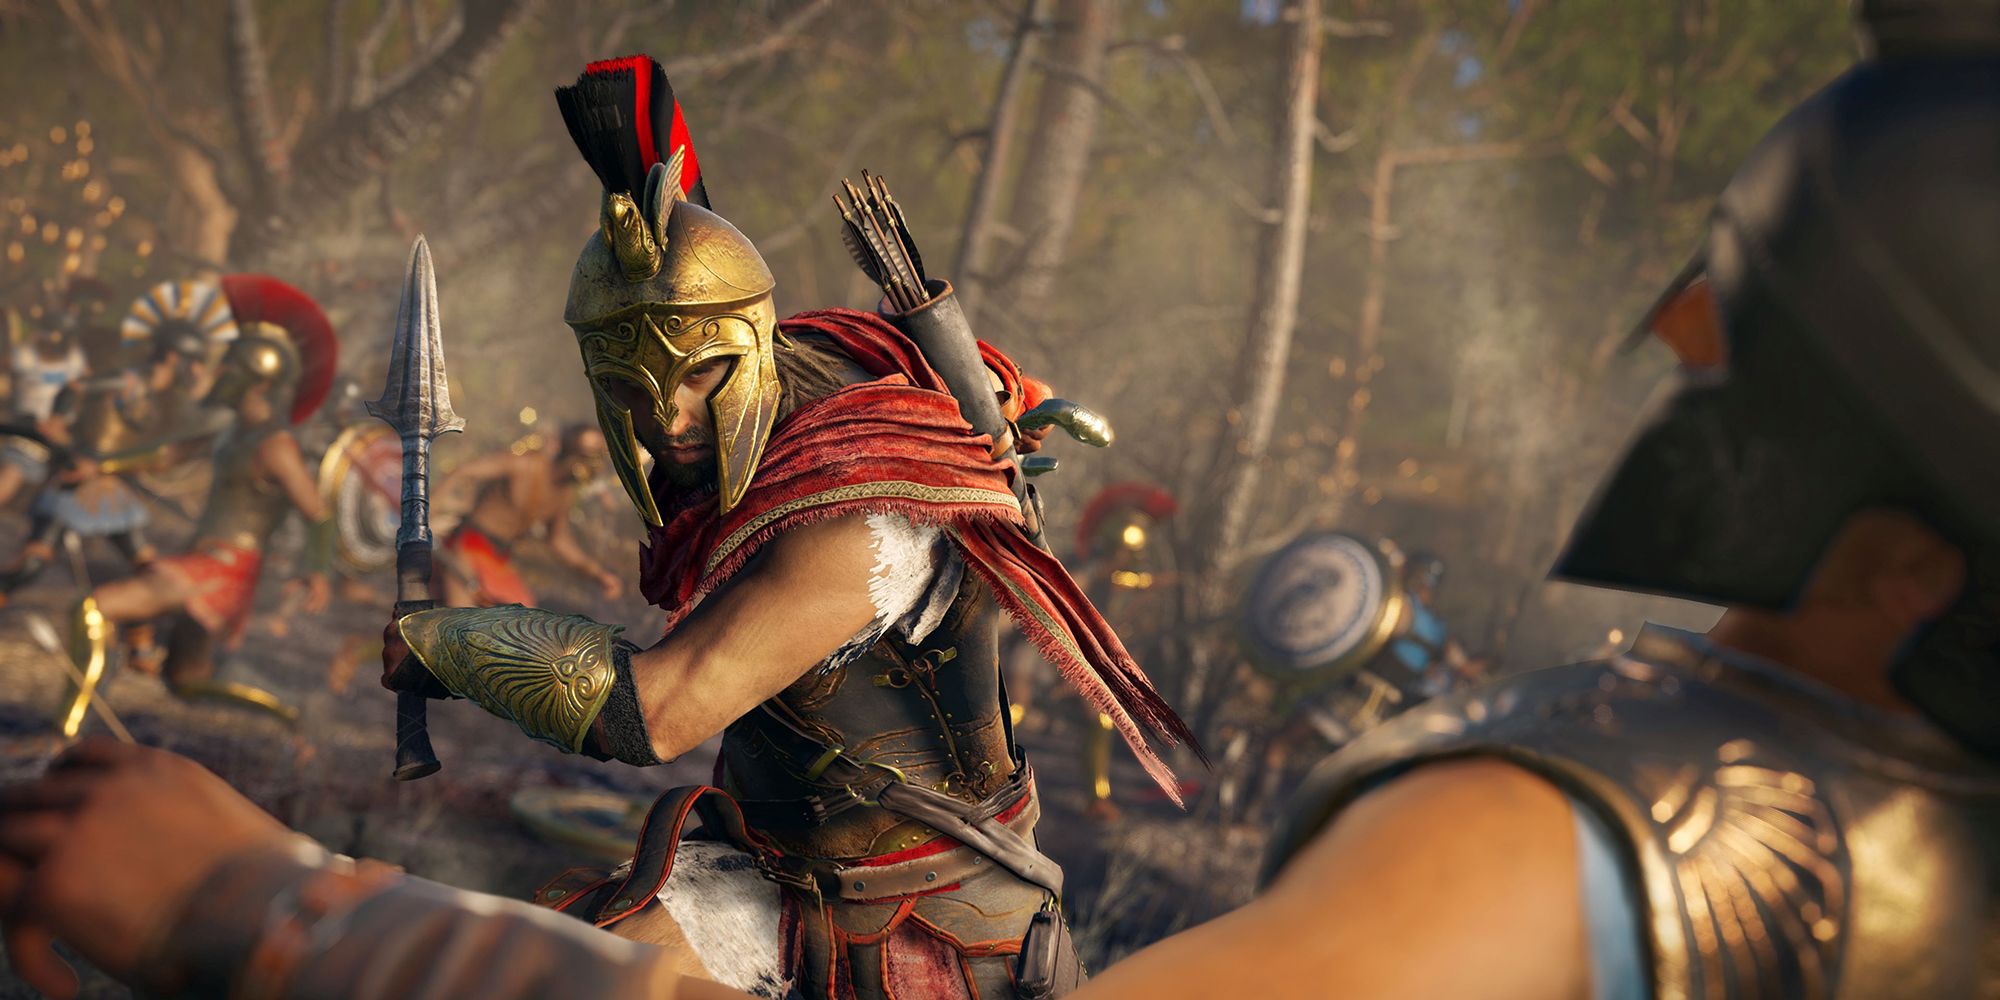 Combat in Assassin's Creed Odyssey